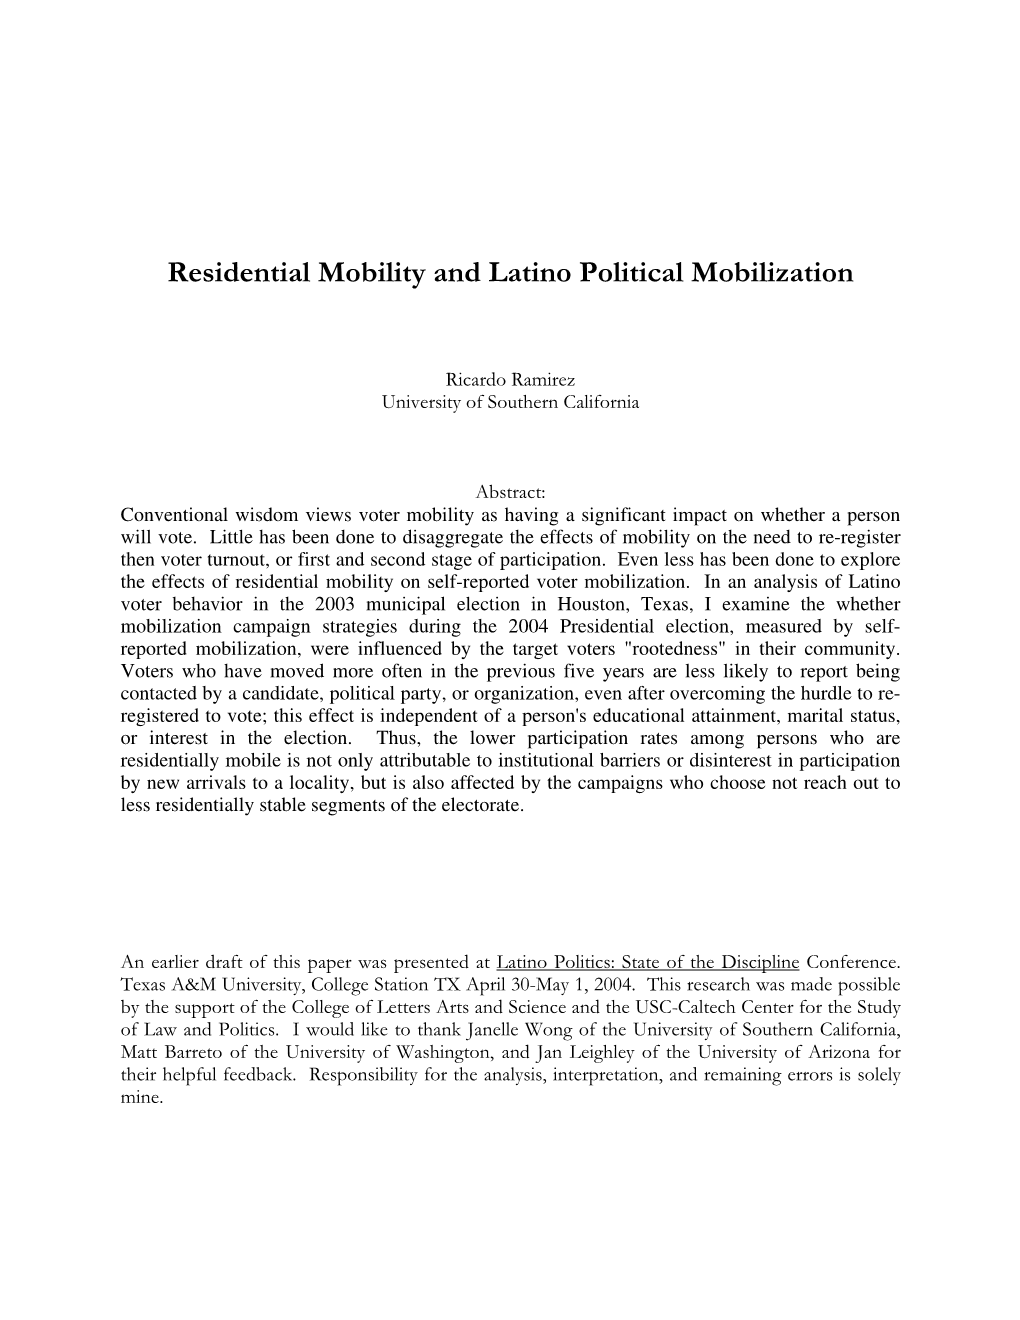 Residential Mobility and Latino Political Mobilization